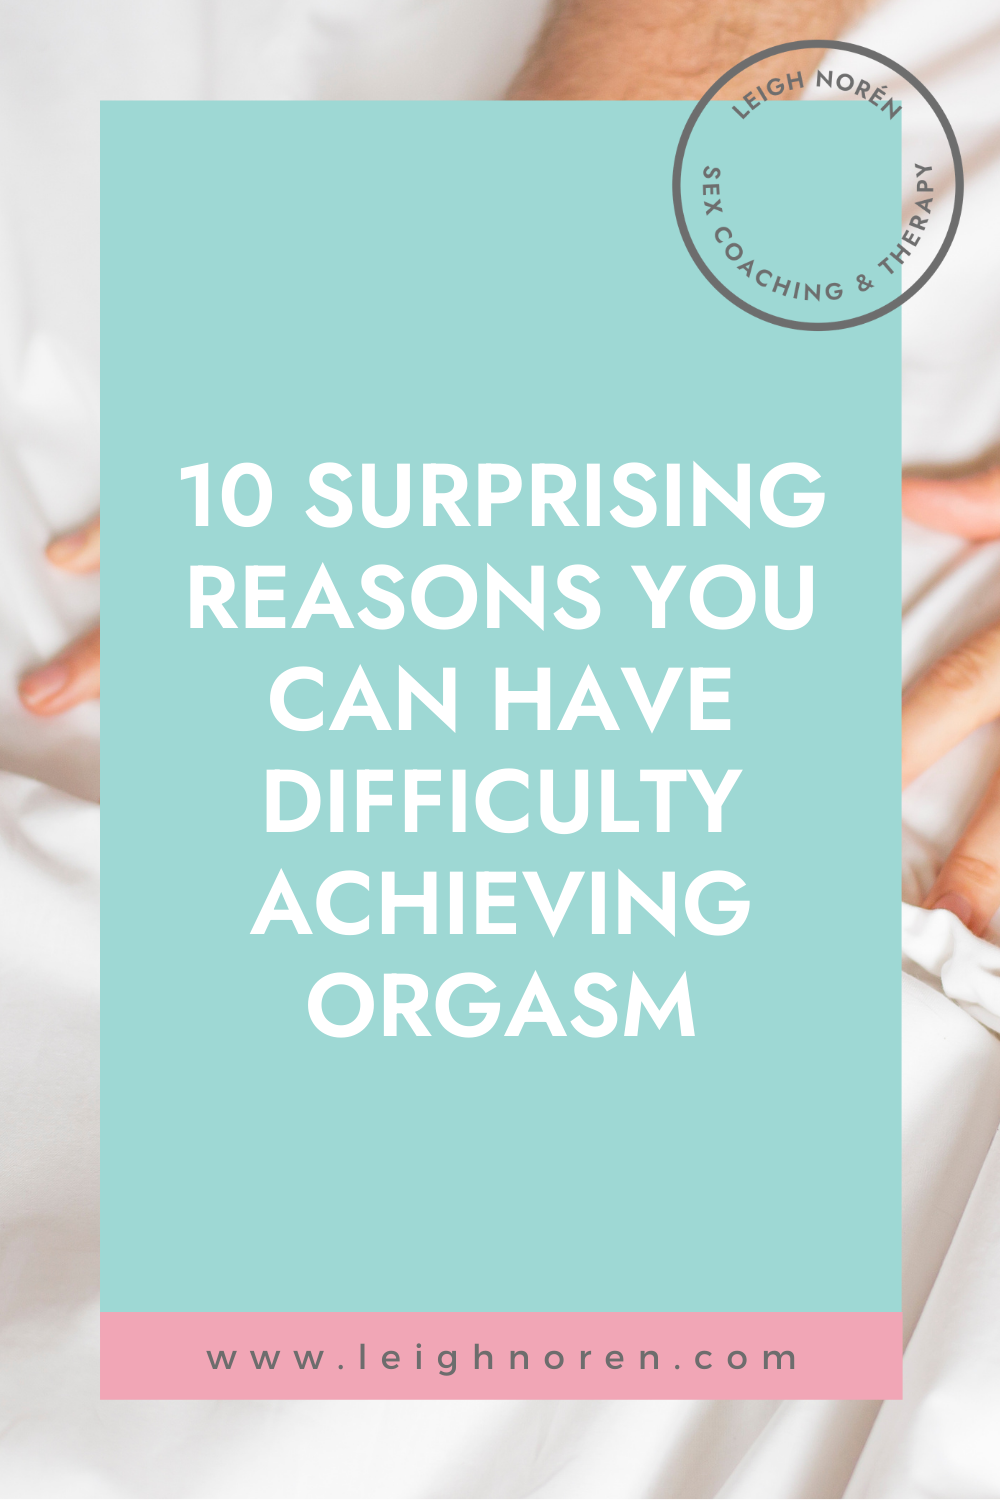 Our Female Orgasm: 13 Faqs About Types, How To Have One ... Diaries